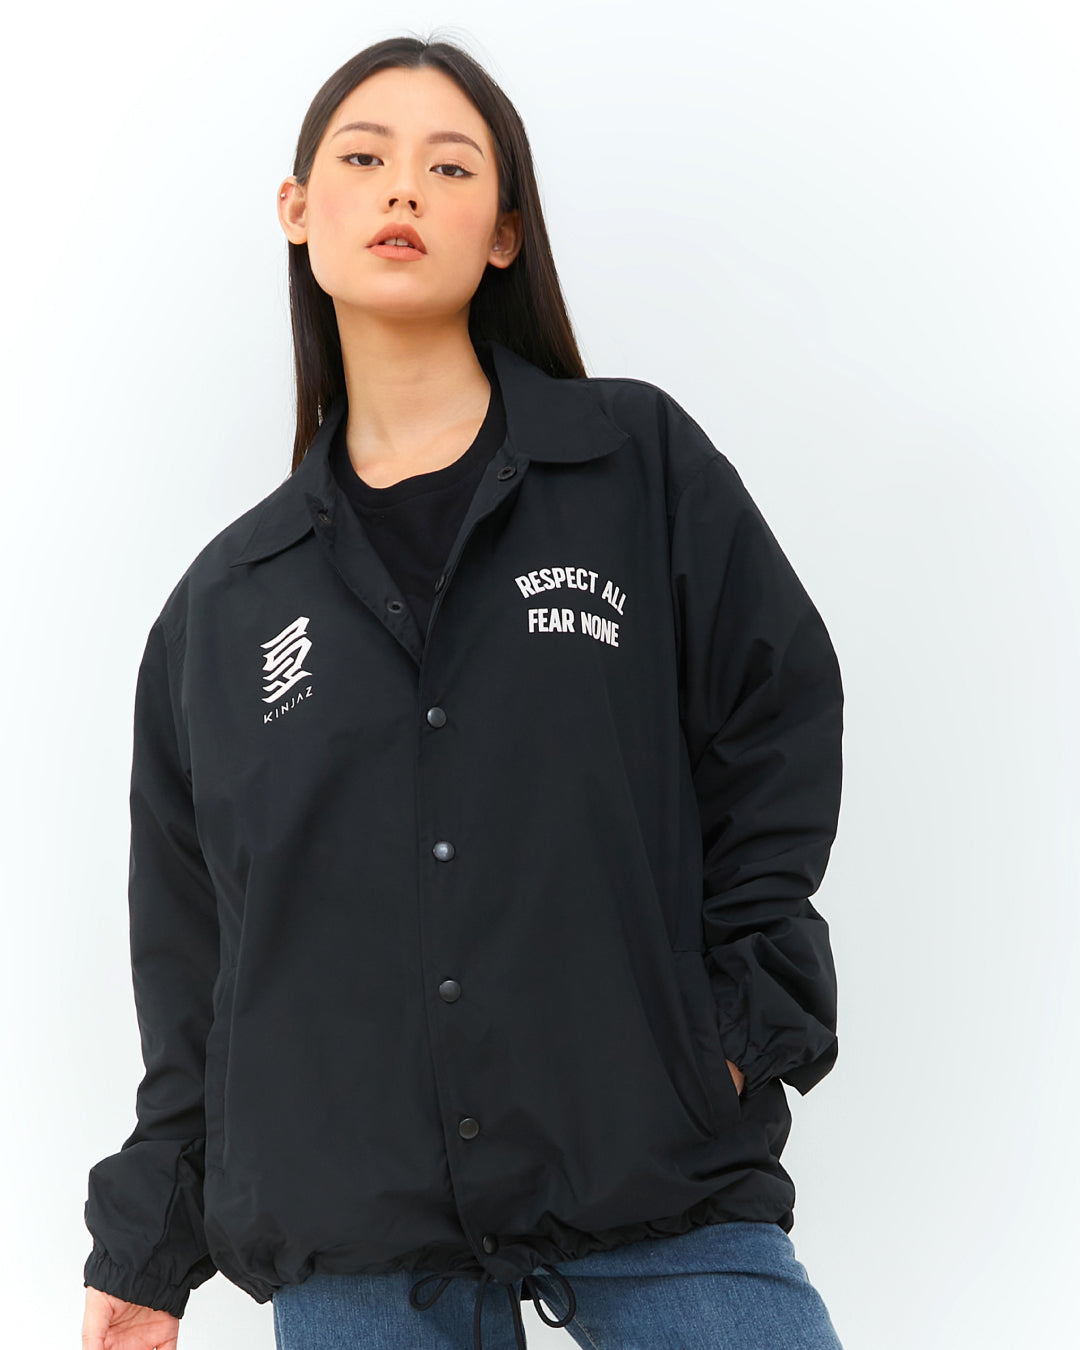 "Respect All Fear None" Coach Jacket